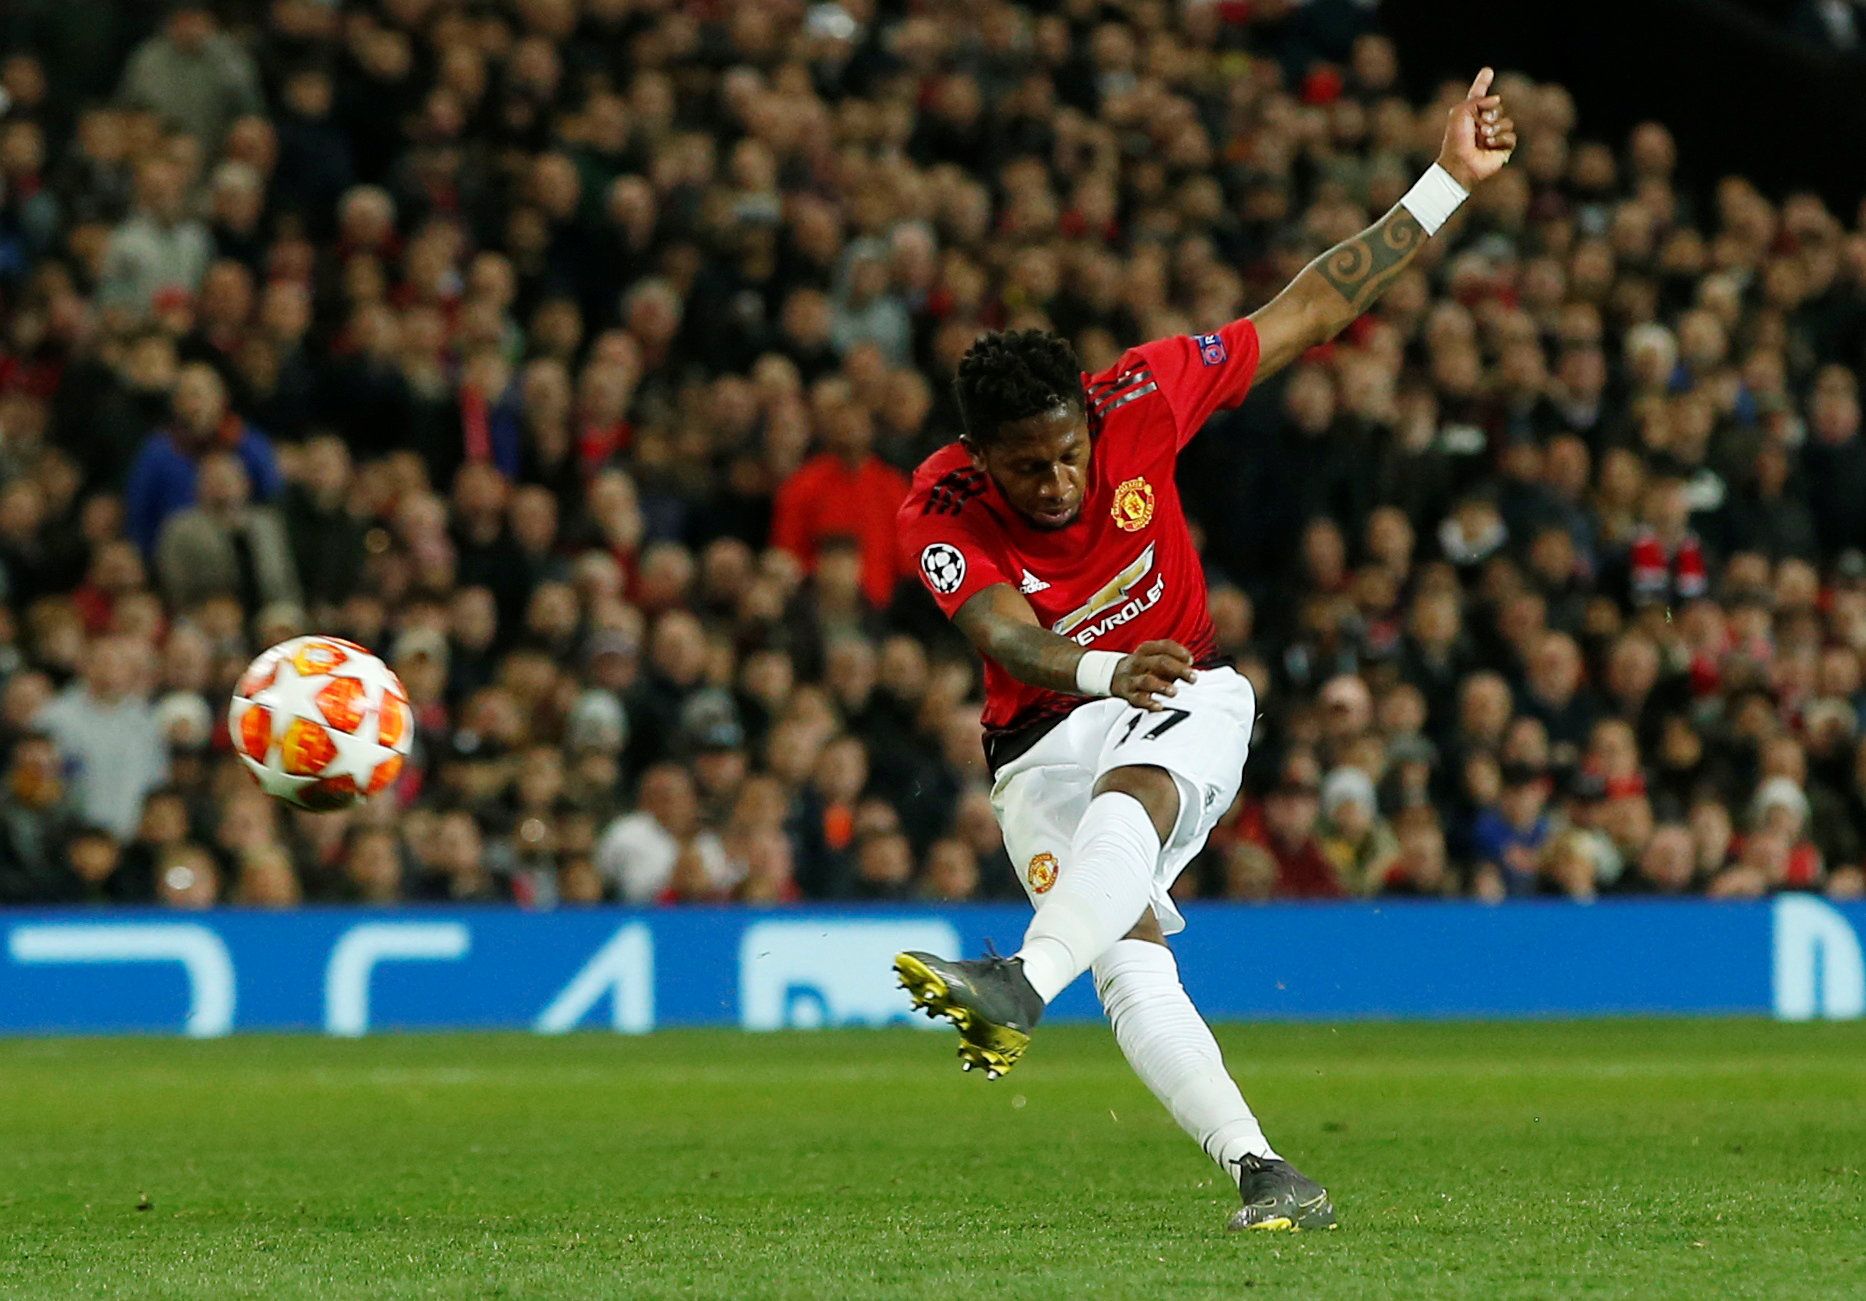 Soccer Football - Champions League Quarter Final First Leg - Manchester United v FC Barcelona - Old Trafford, Manchester, Britain - April 10, 2019  Manchester United's Fred shoots at goal                REUTERS/Andrew Yates